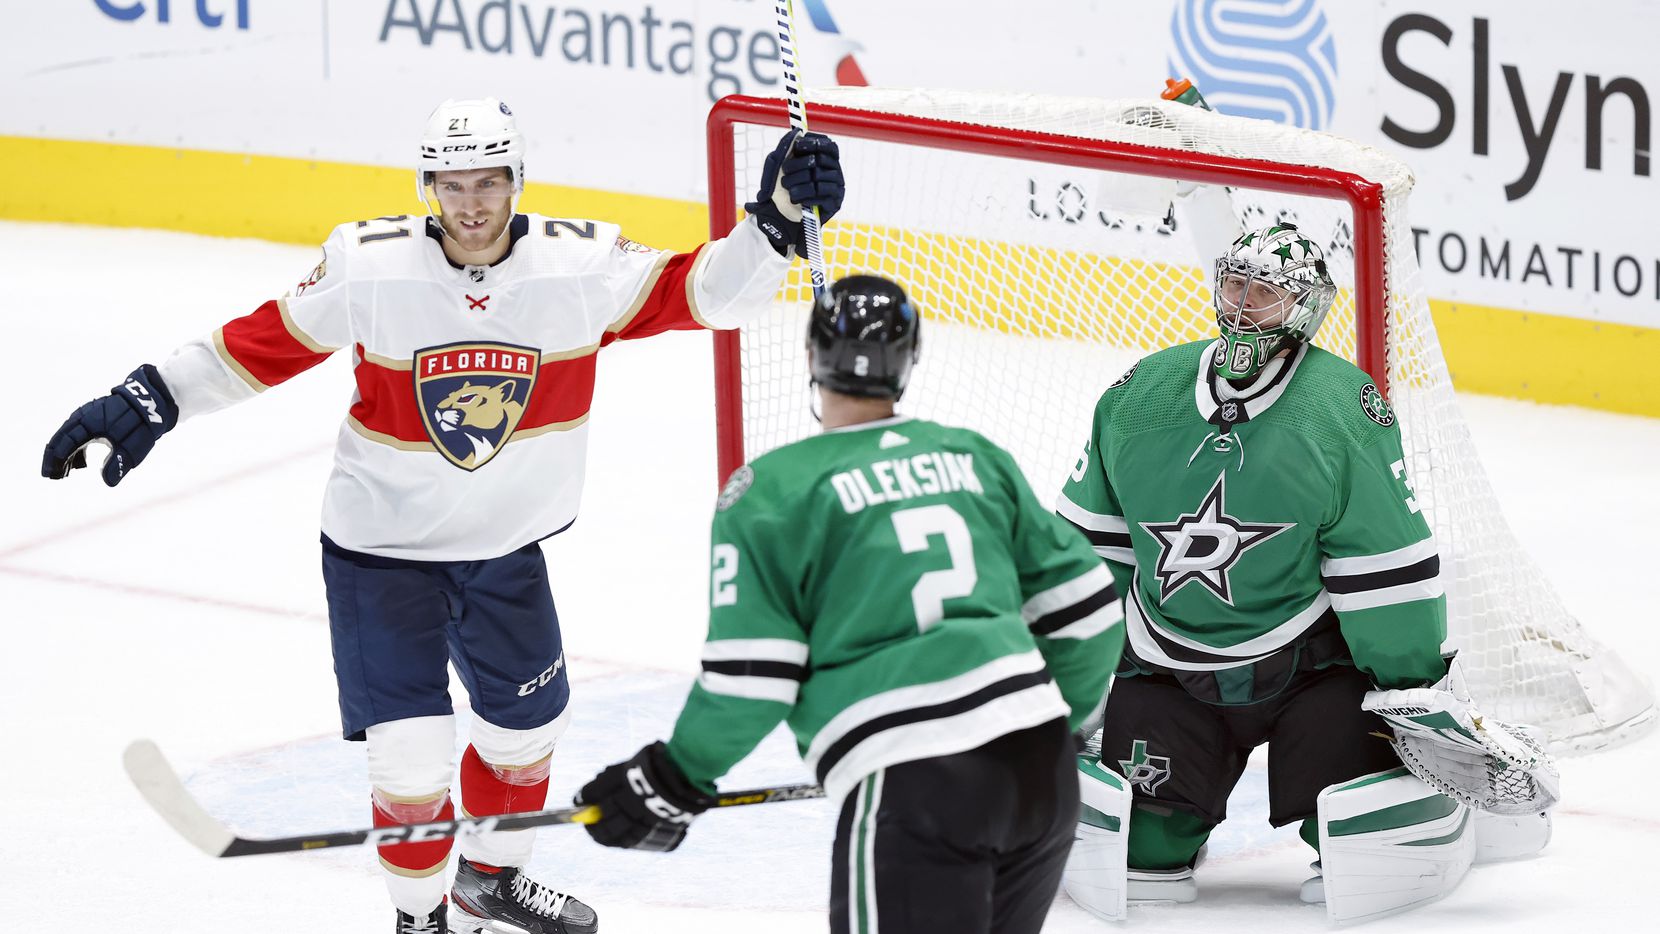 Florida Panthers center Alex Wennberg (21) celebrates center Frank Vatrano's overtime goal on Dallas Stars goaltender Anton Khudobin (35) at the American Airlines Center in Dallas, Tuesday, April 13, 2021. The Stars lost, 3-2.